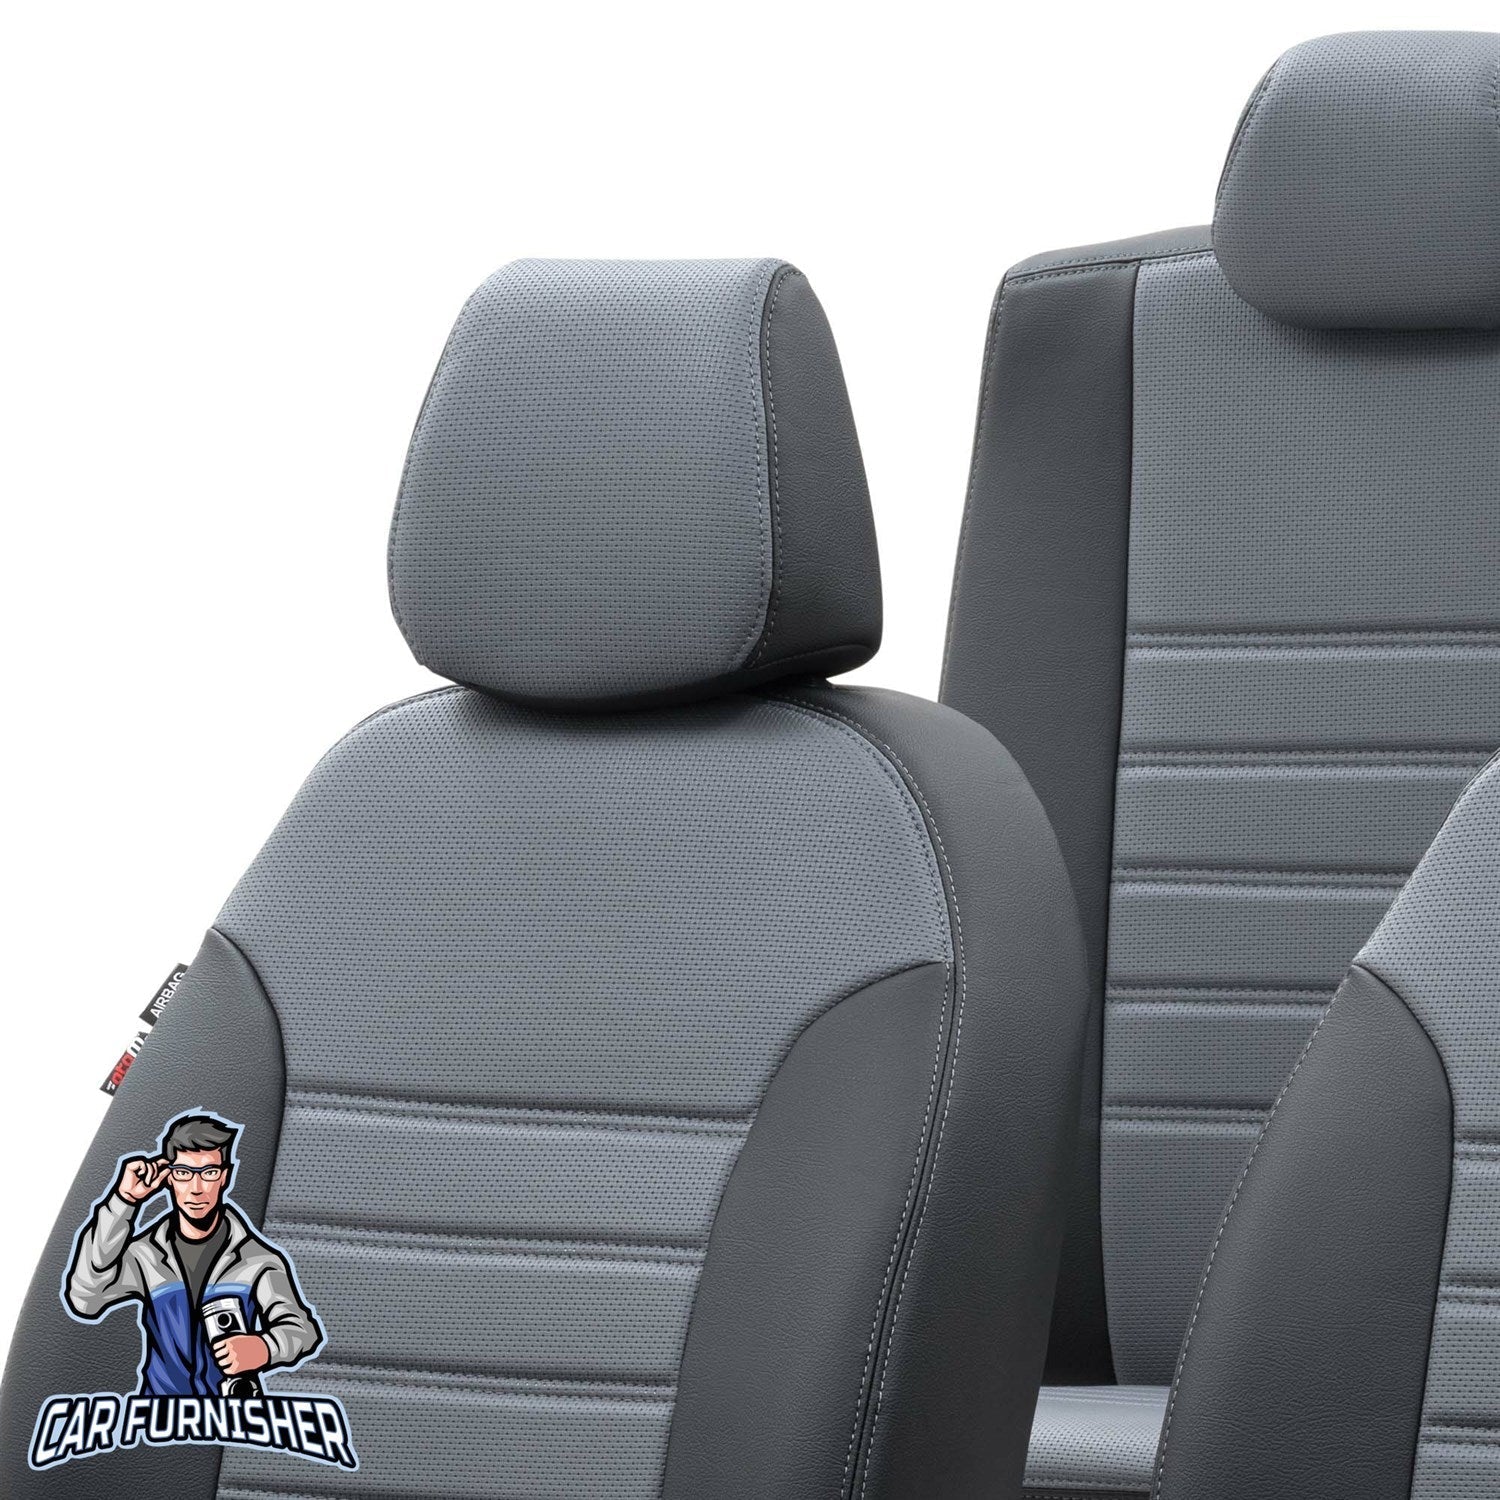 Renault Fluence Seat Covers New York Leather Design Smoked Black Leather